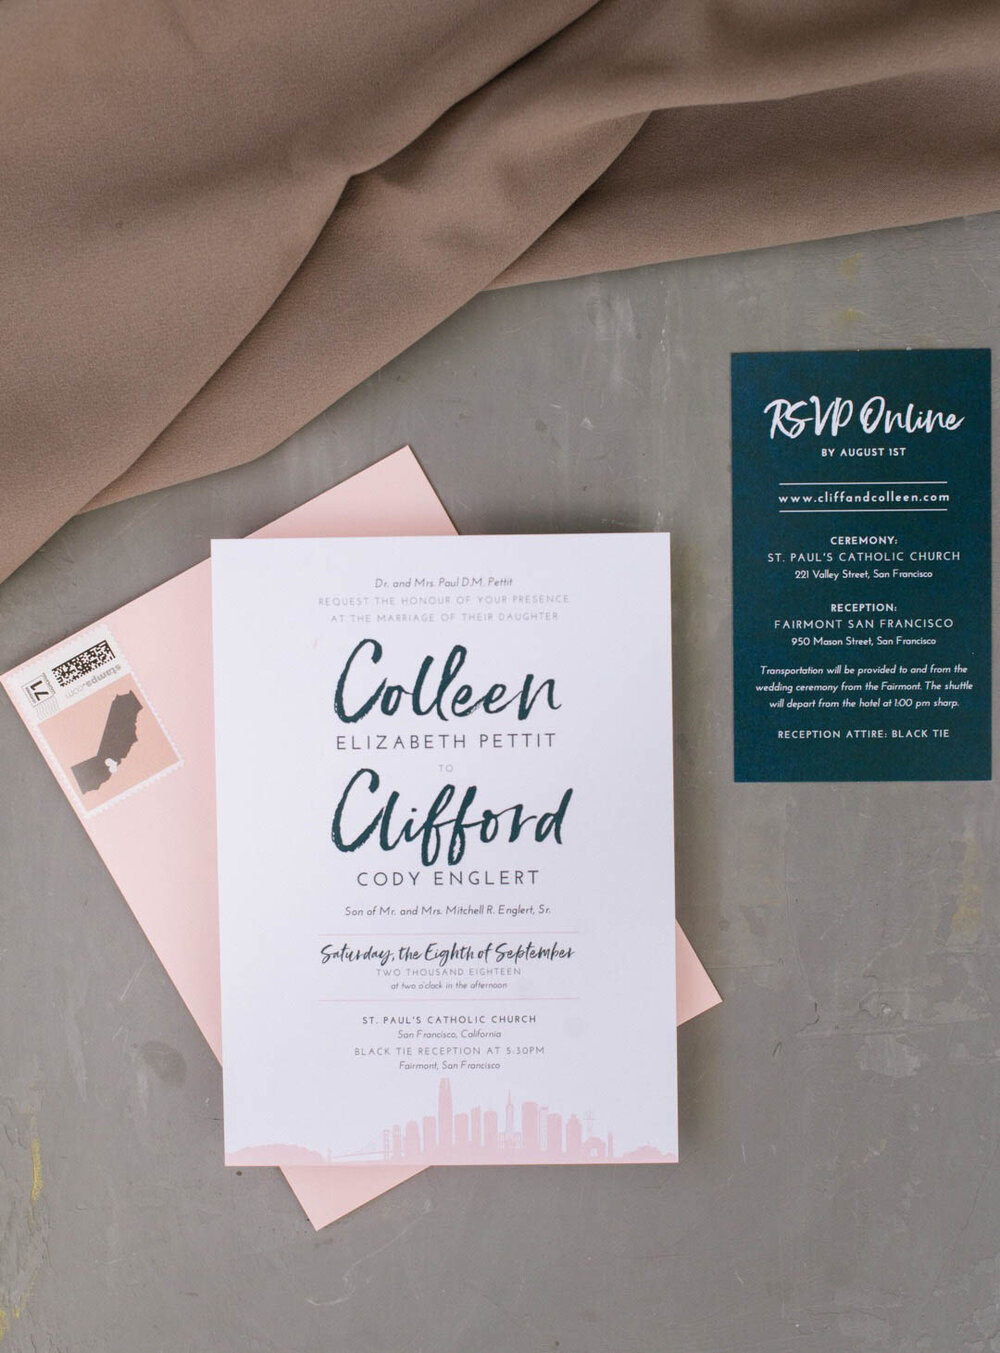 9.8.18 | Colleen + Cliff